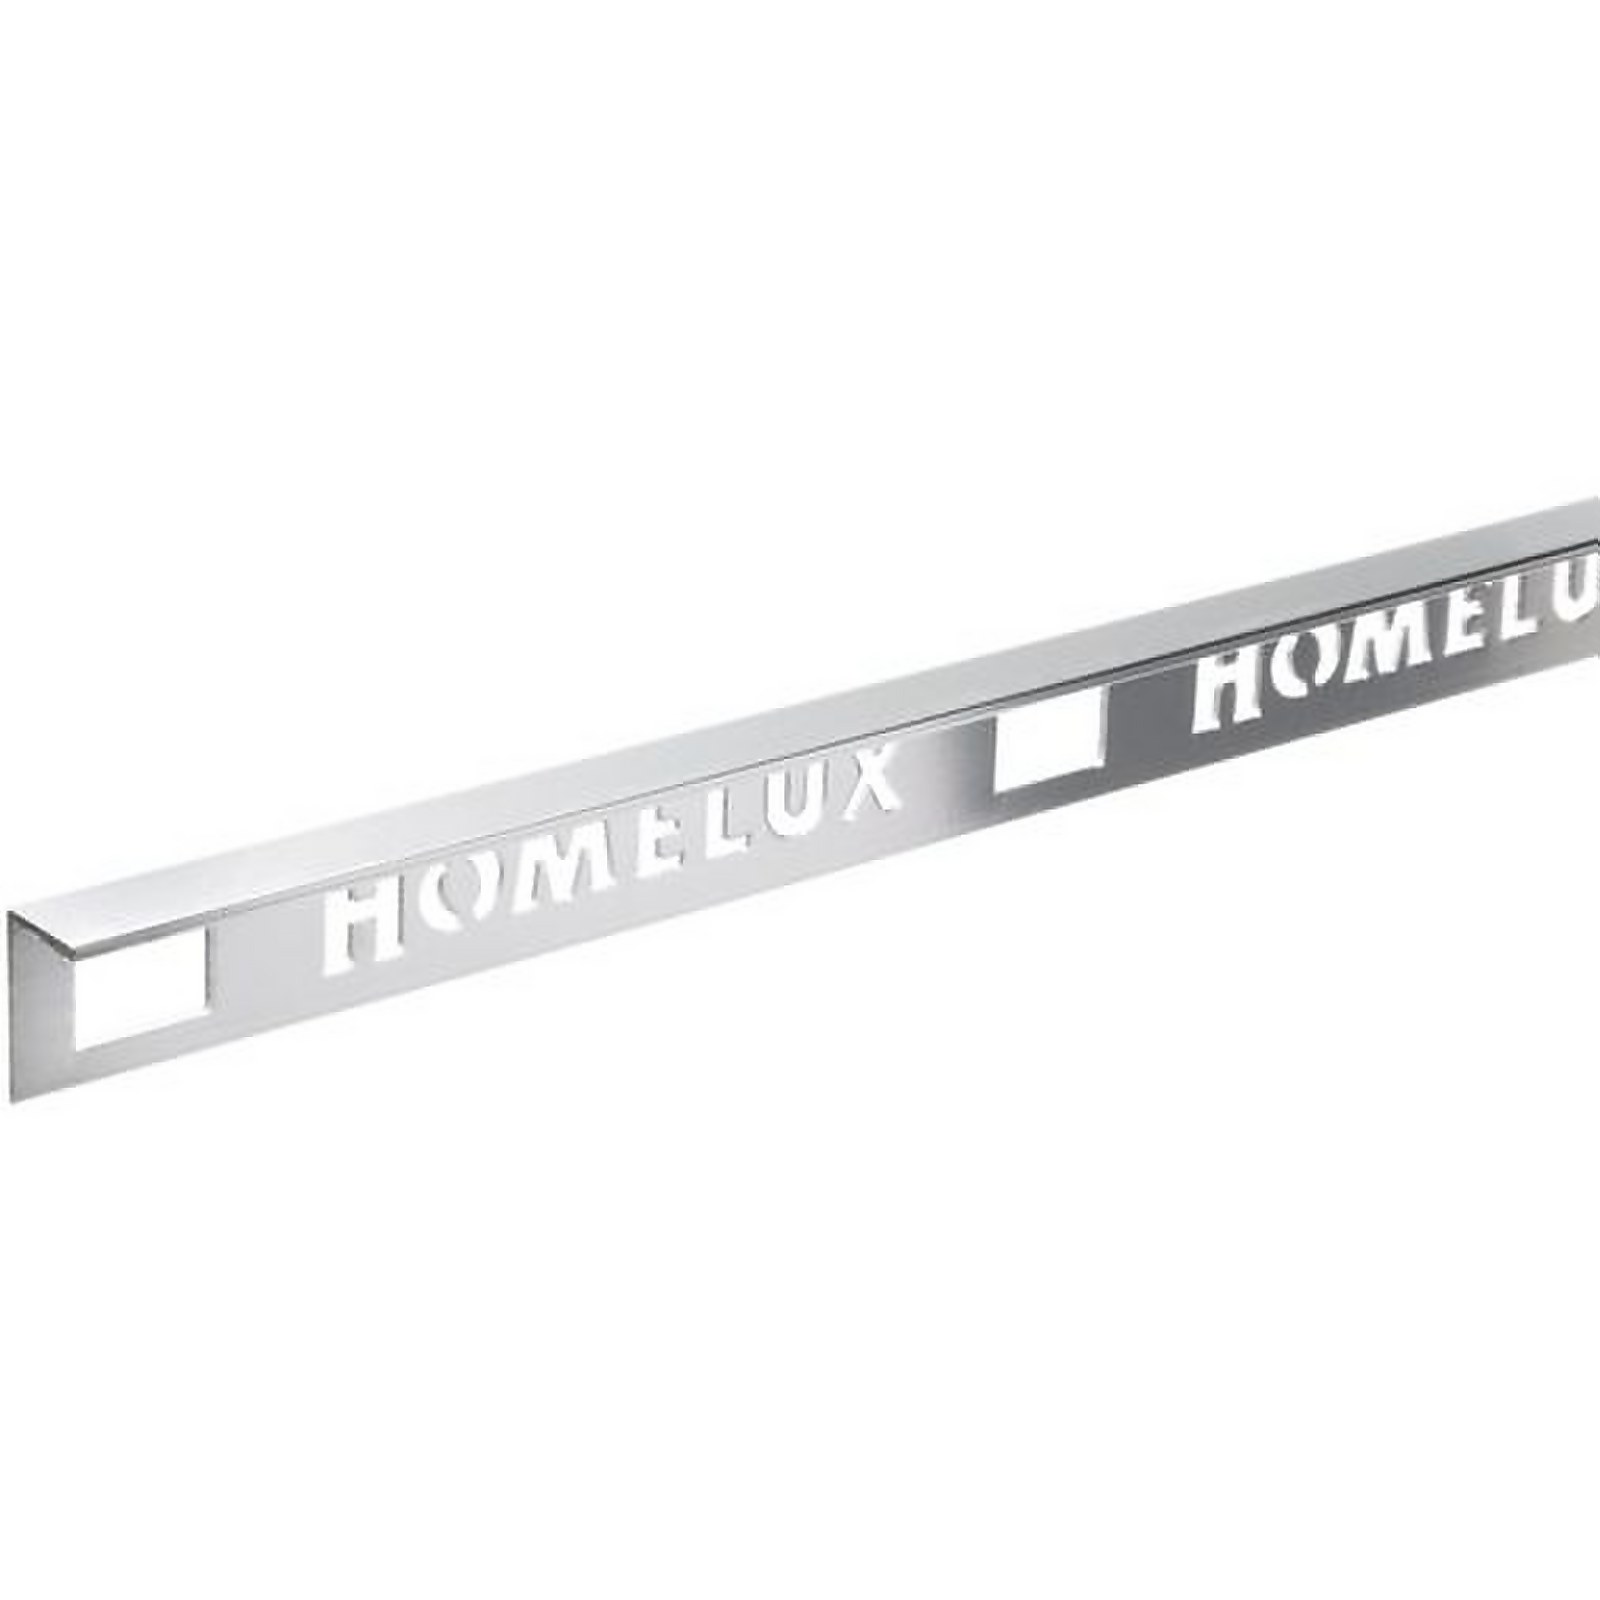 Photo of Homelux 10mm Straight Edge Tile Trim - Silver Effect - 1.83m